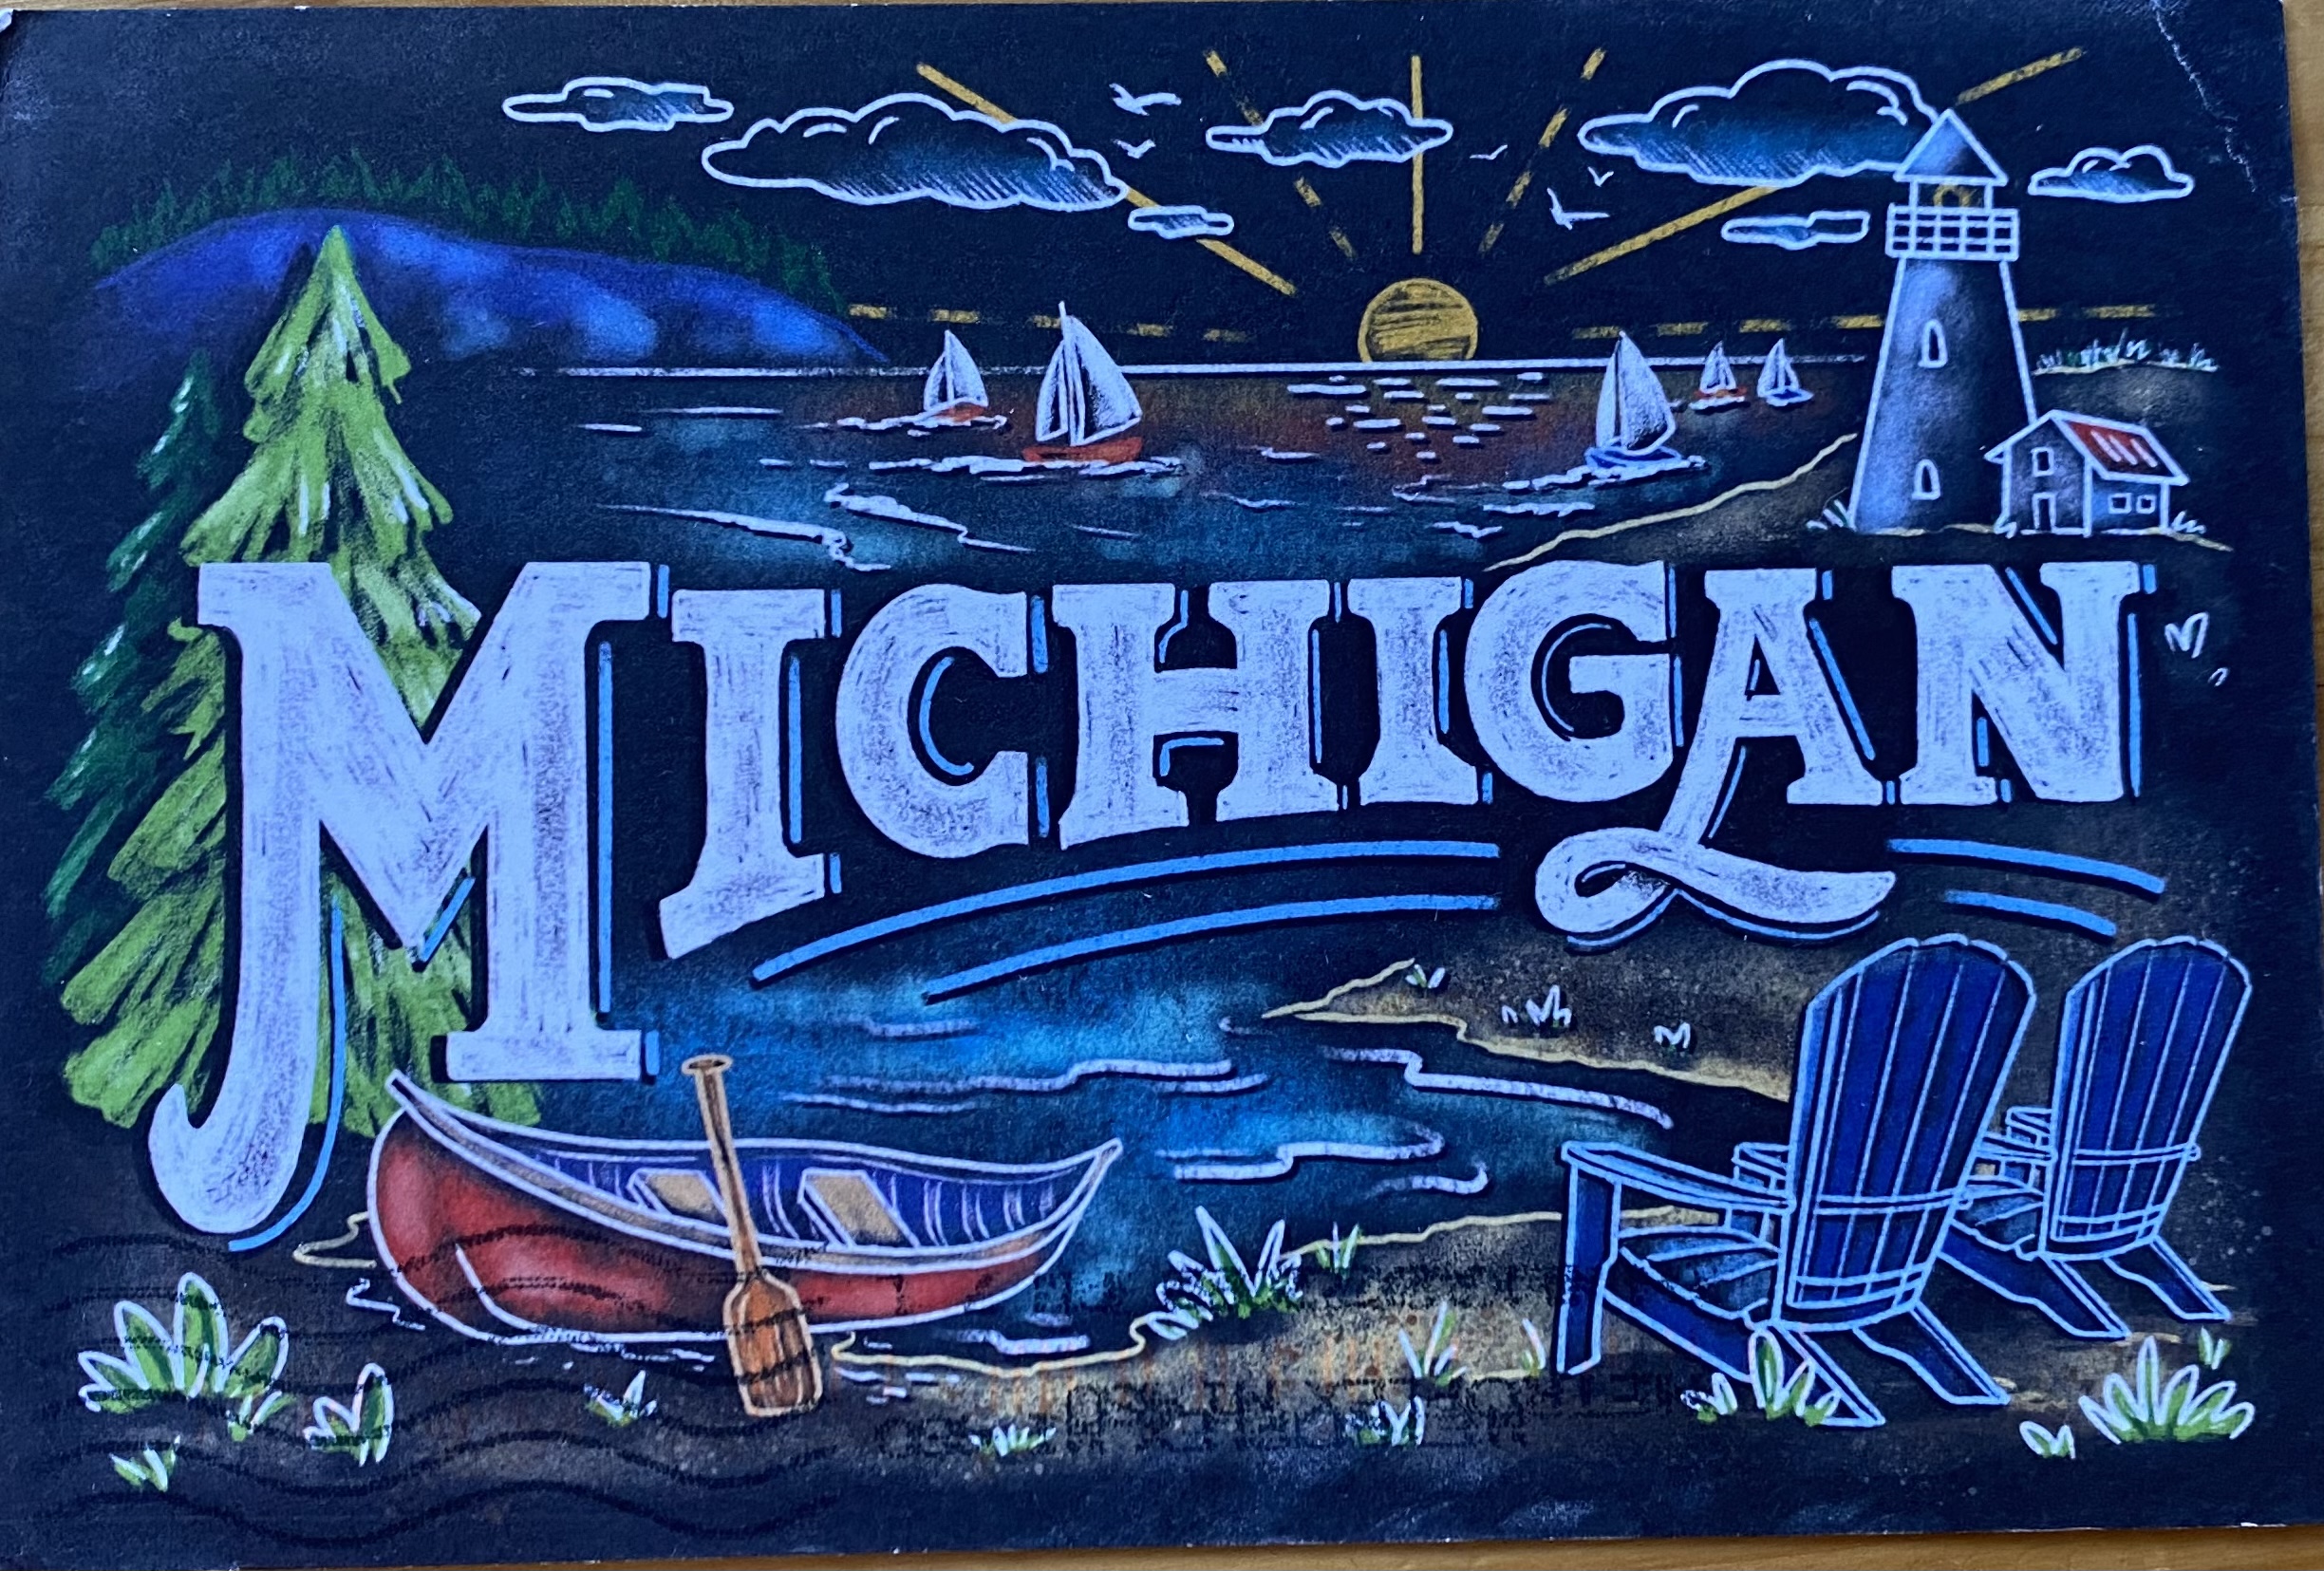 Postcard from Michigan, received August 10 2022